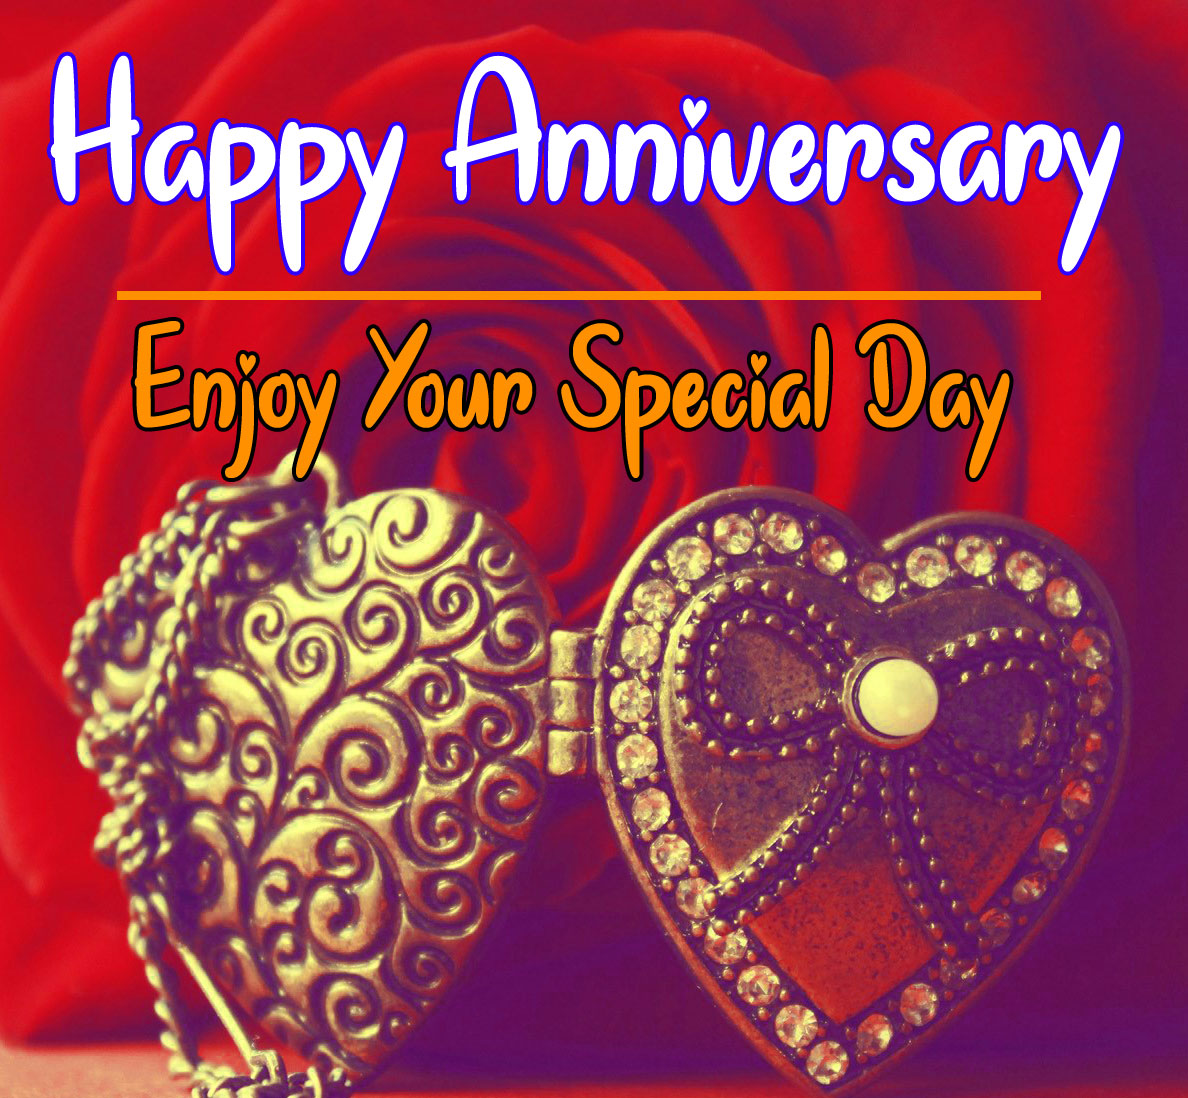 Happy Anniversary - Enjoy Your Special Day